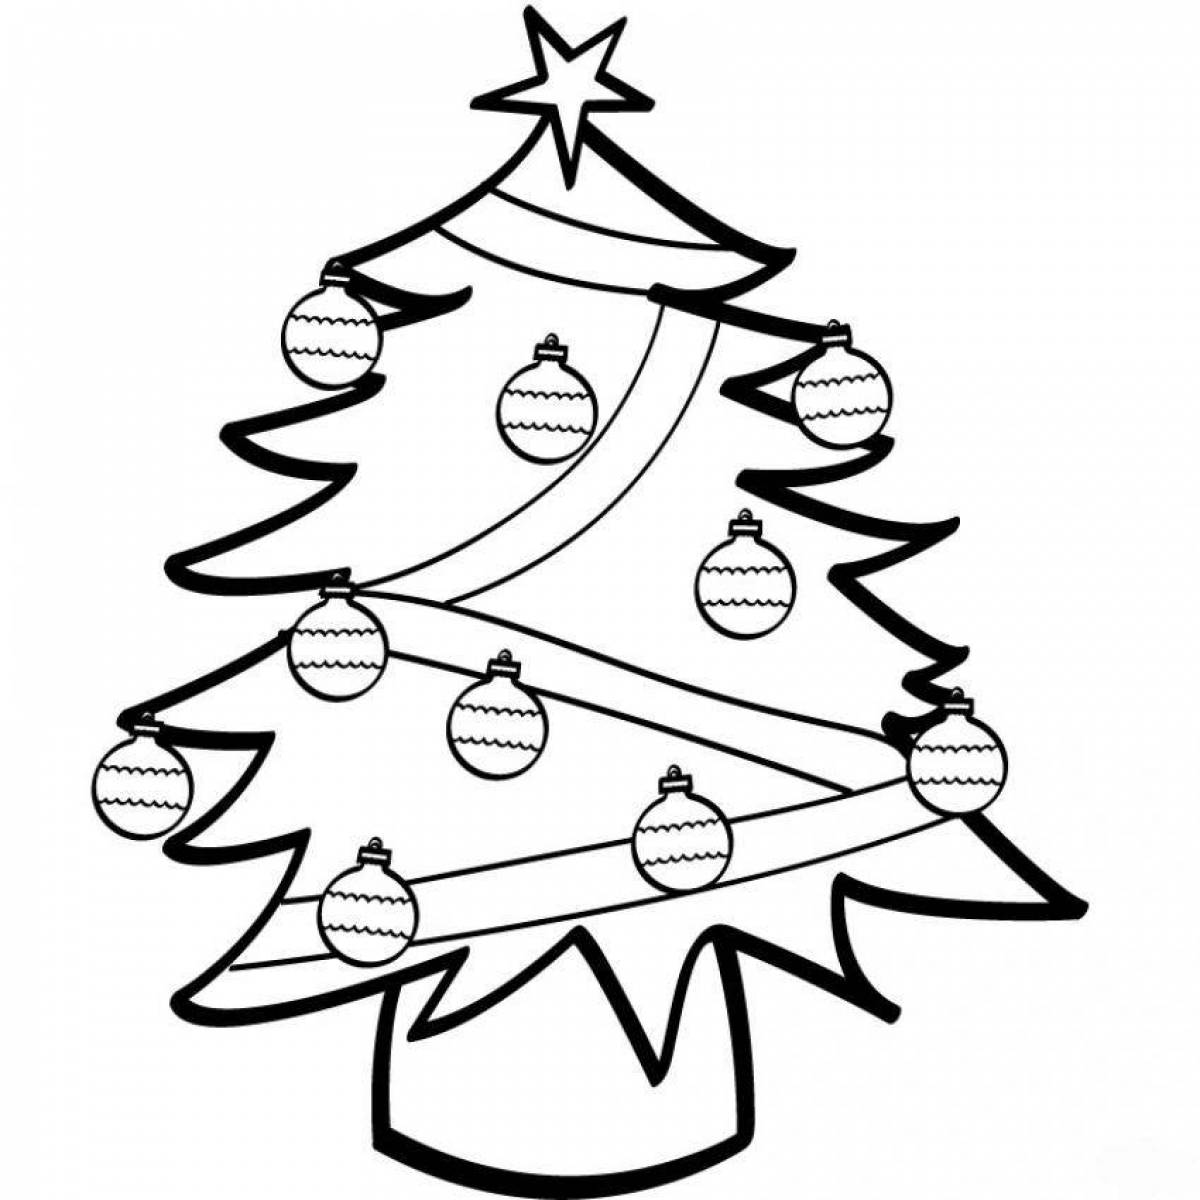 Magic Christmas tree coloring book for 2-3 year olds